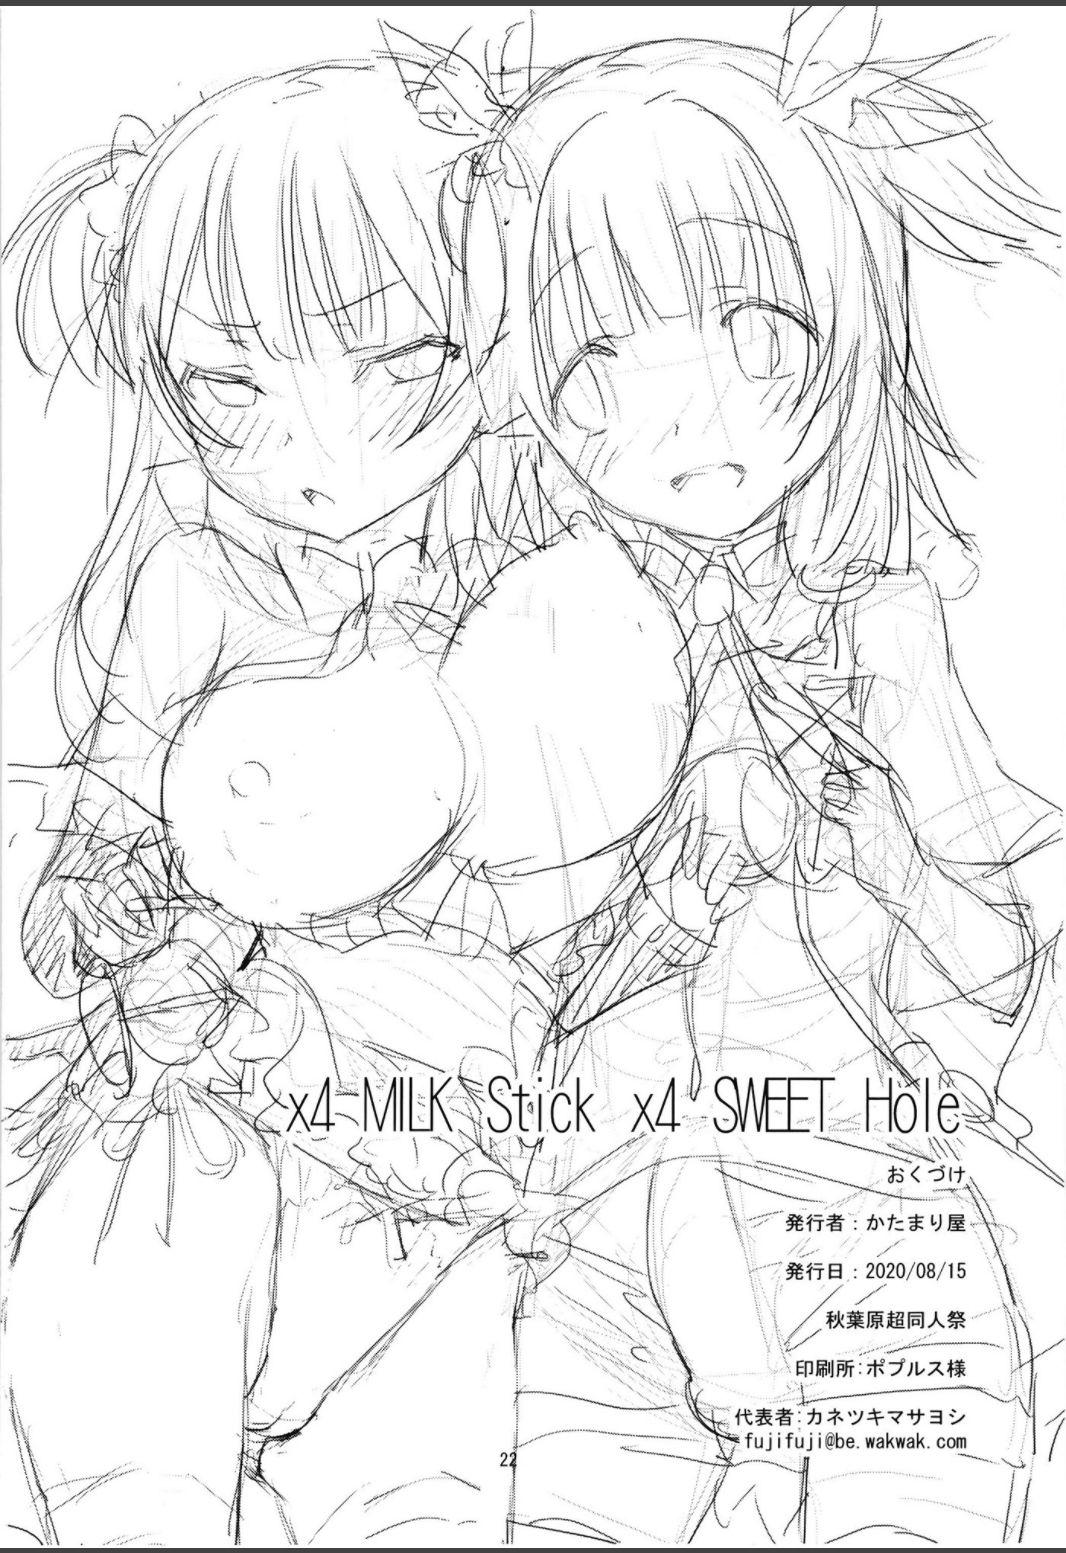 Gay Hunks x4 MILK Stick x4 SWEET Hole - Puella magi madoka magica side story magia record Married - Page 22